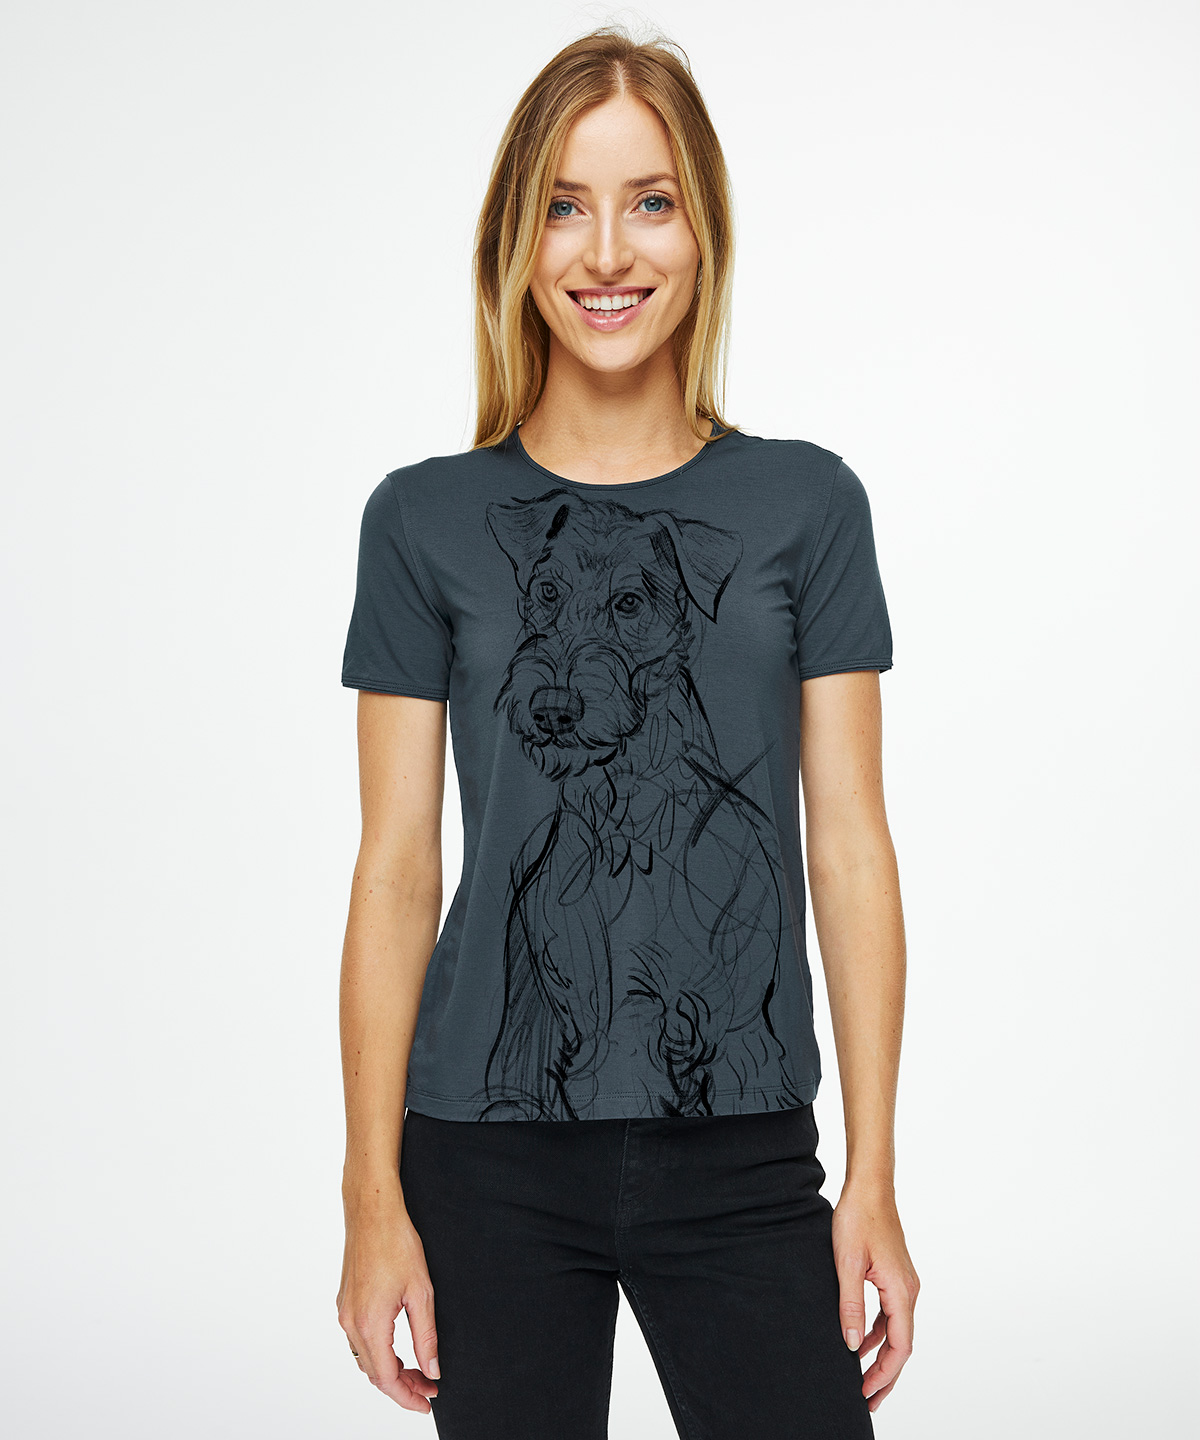 Airedale terrier dark cool gray t-shirt woman